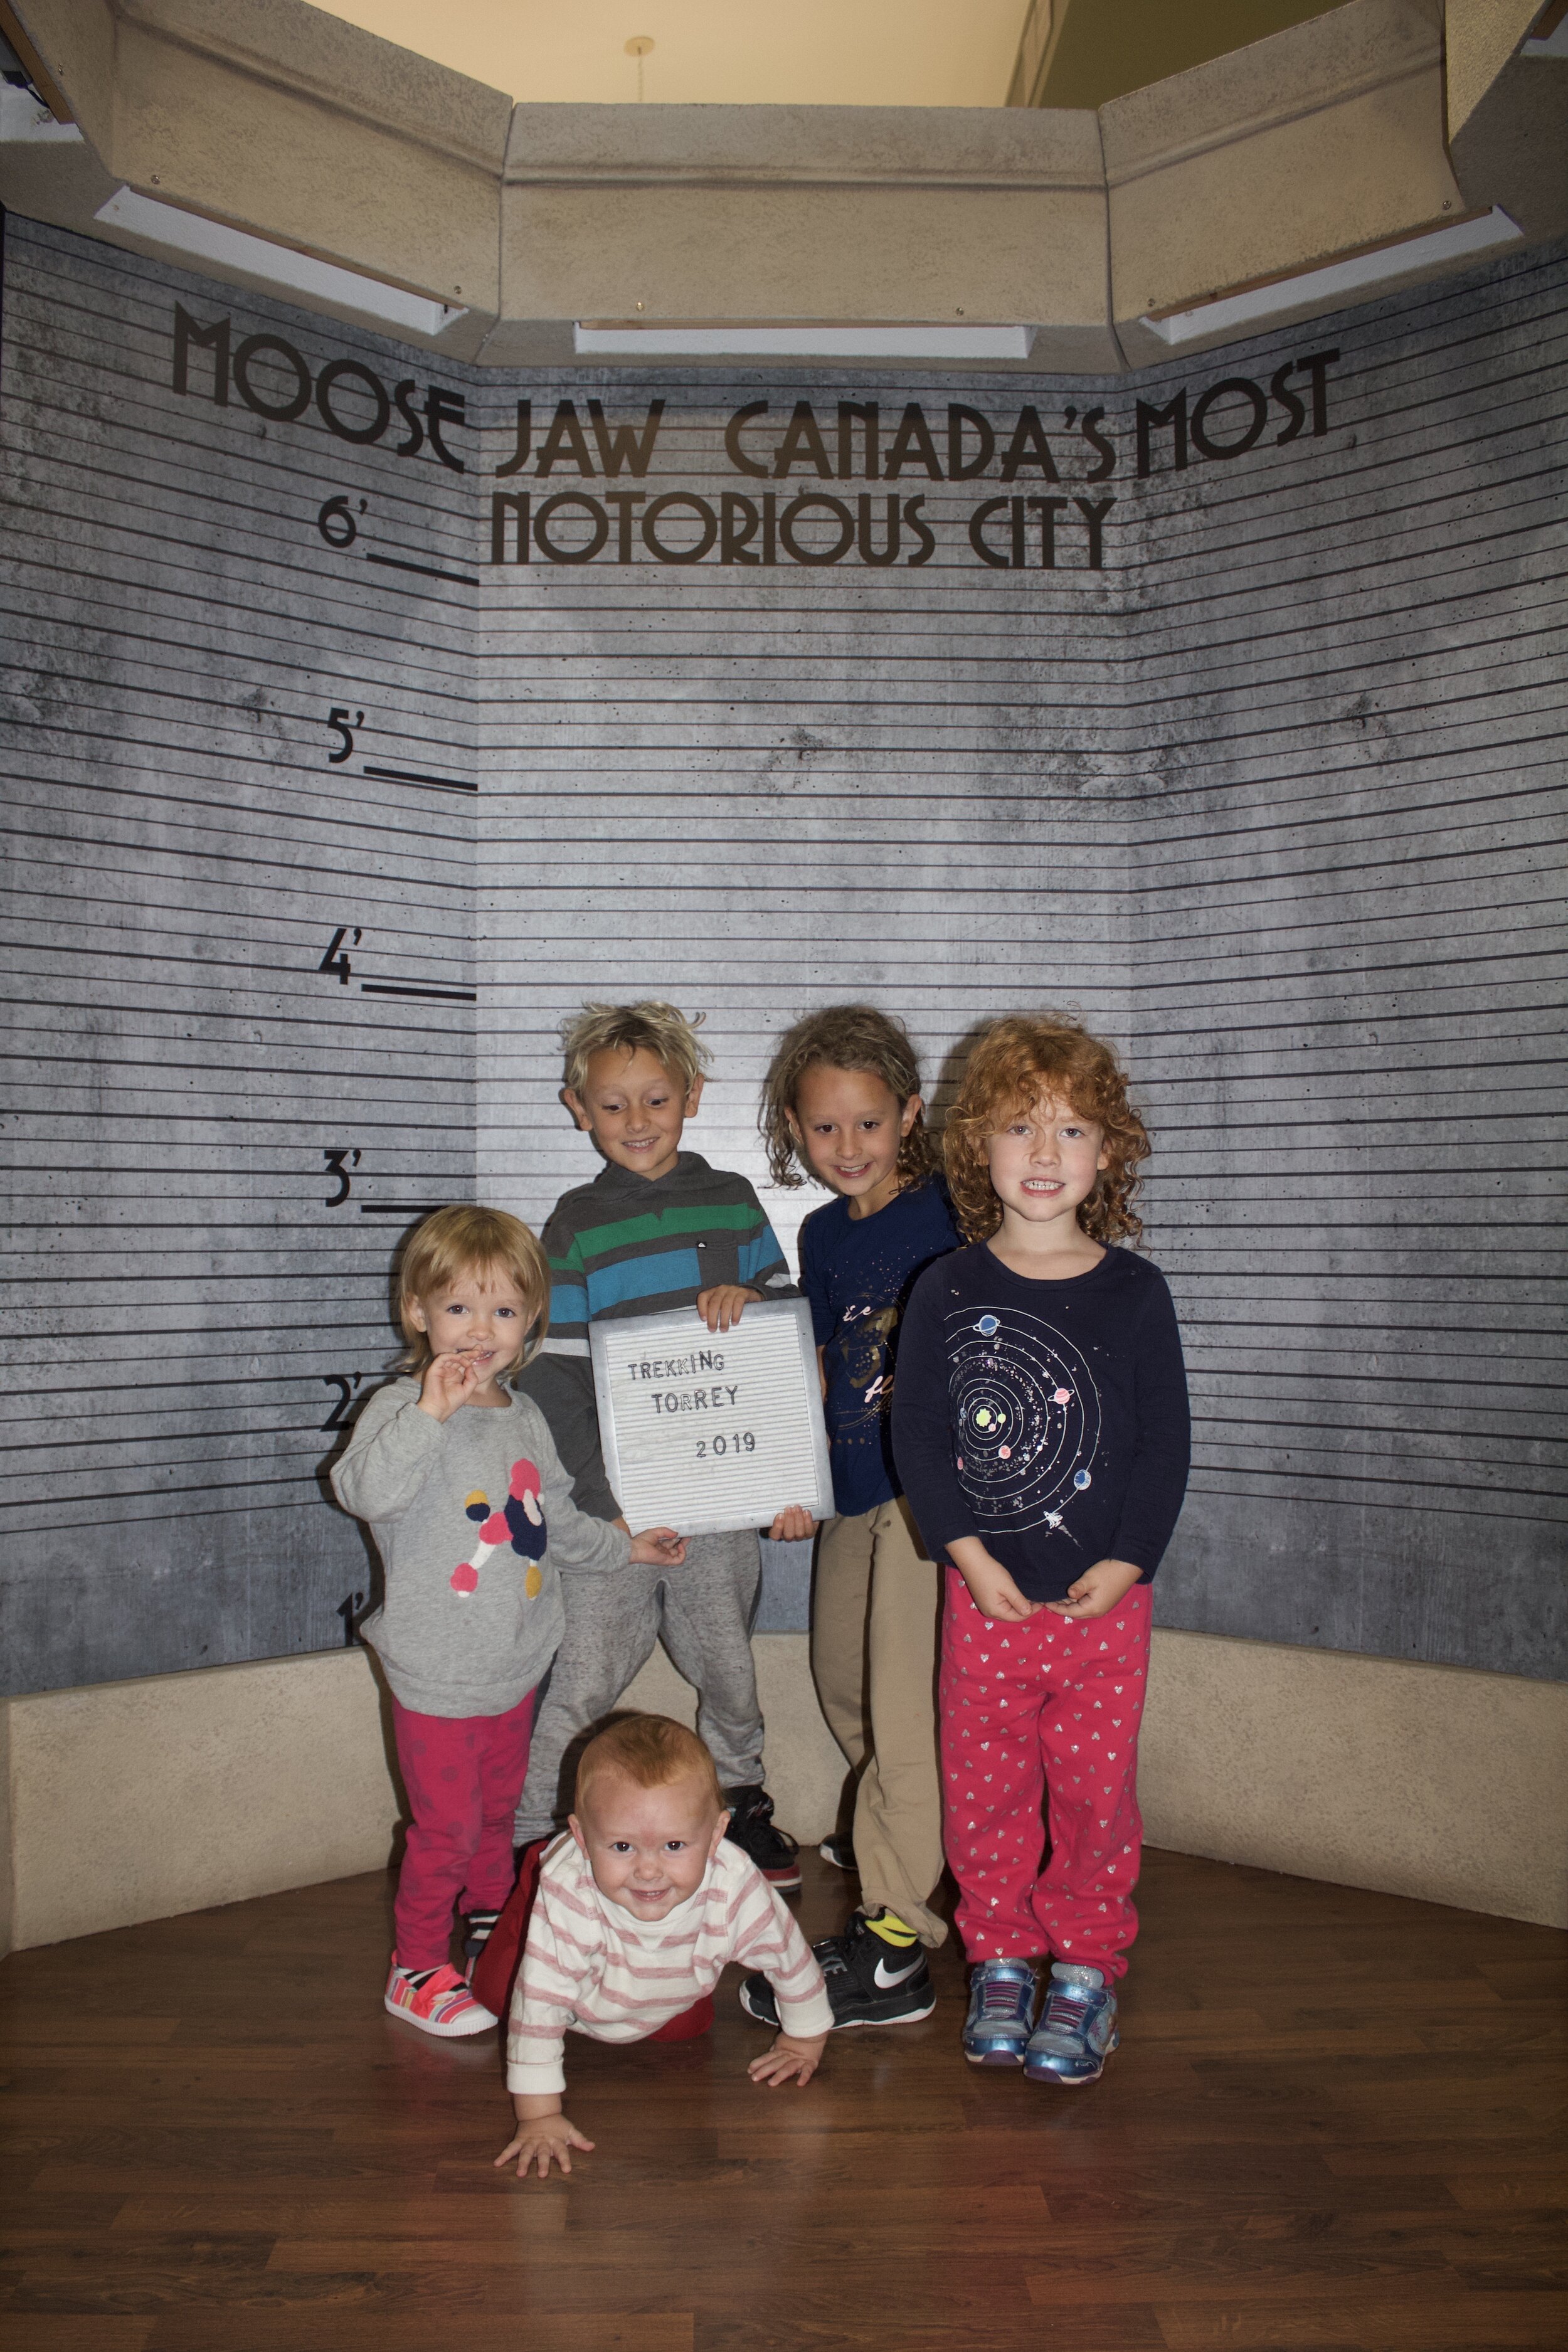  Moose Jaw visitor’s center - we finally caught the American Gang! 